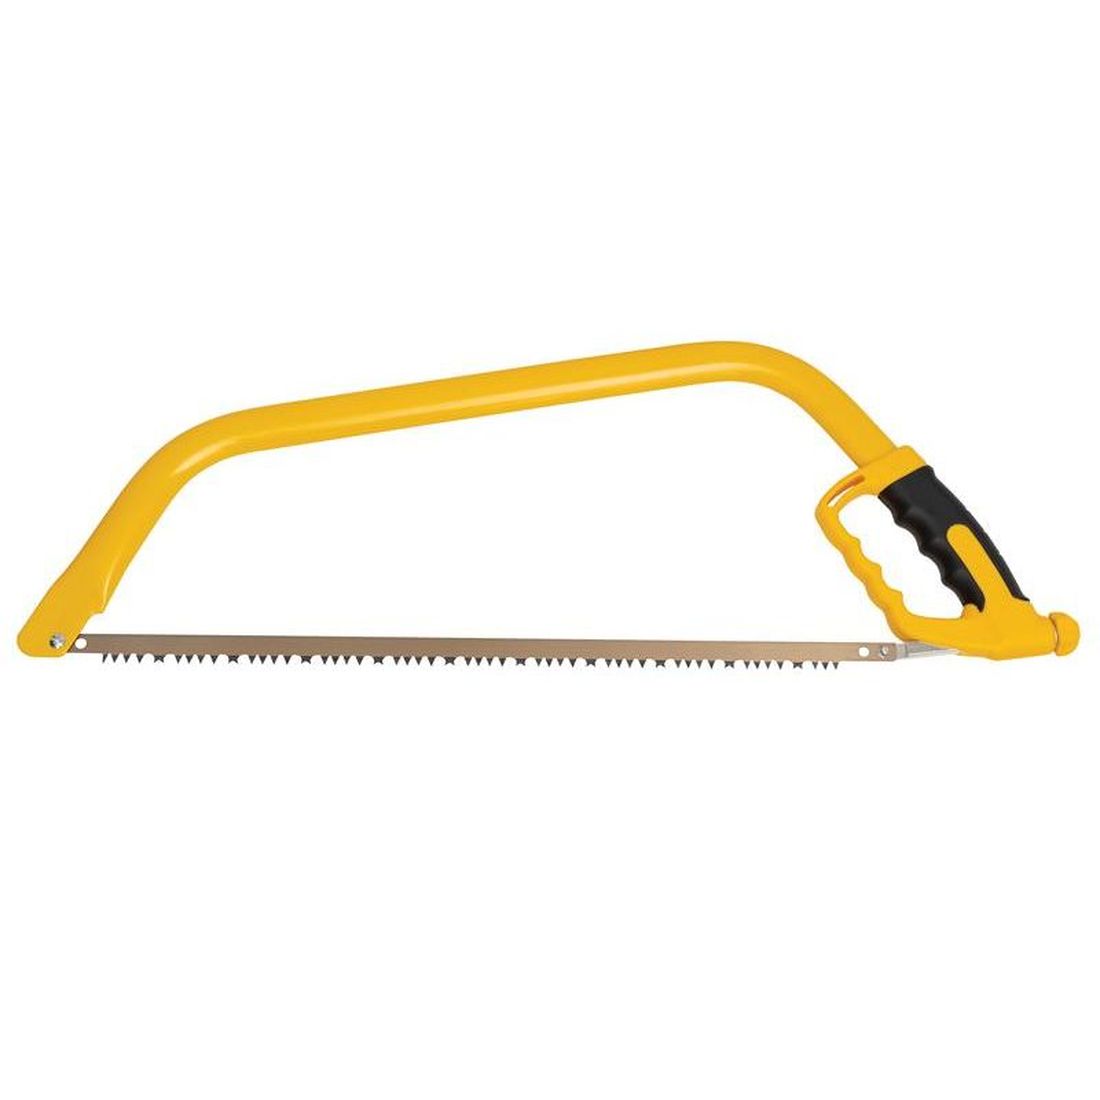 Roughneck Bowsaw 525mm (21in)               